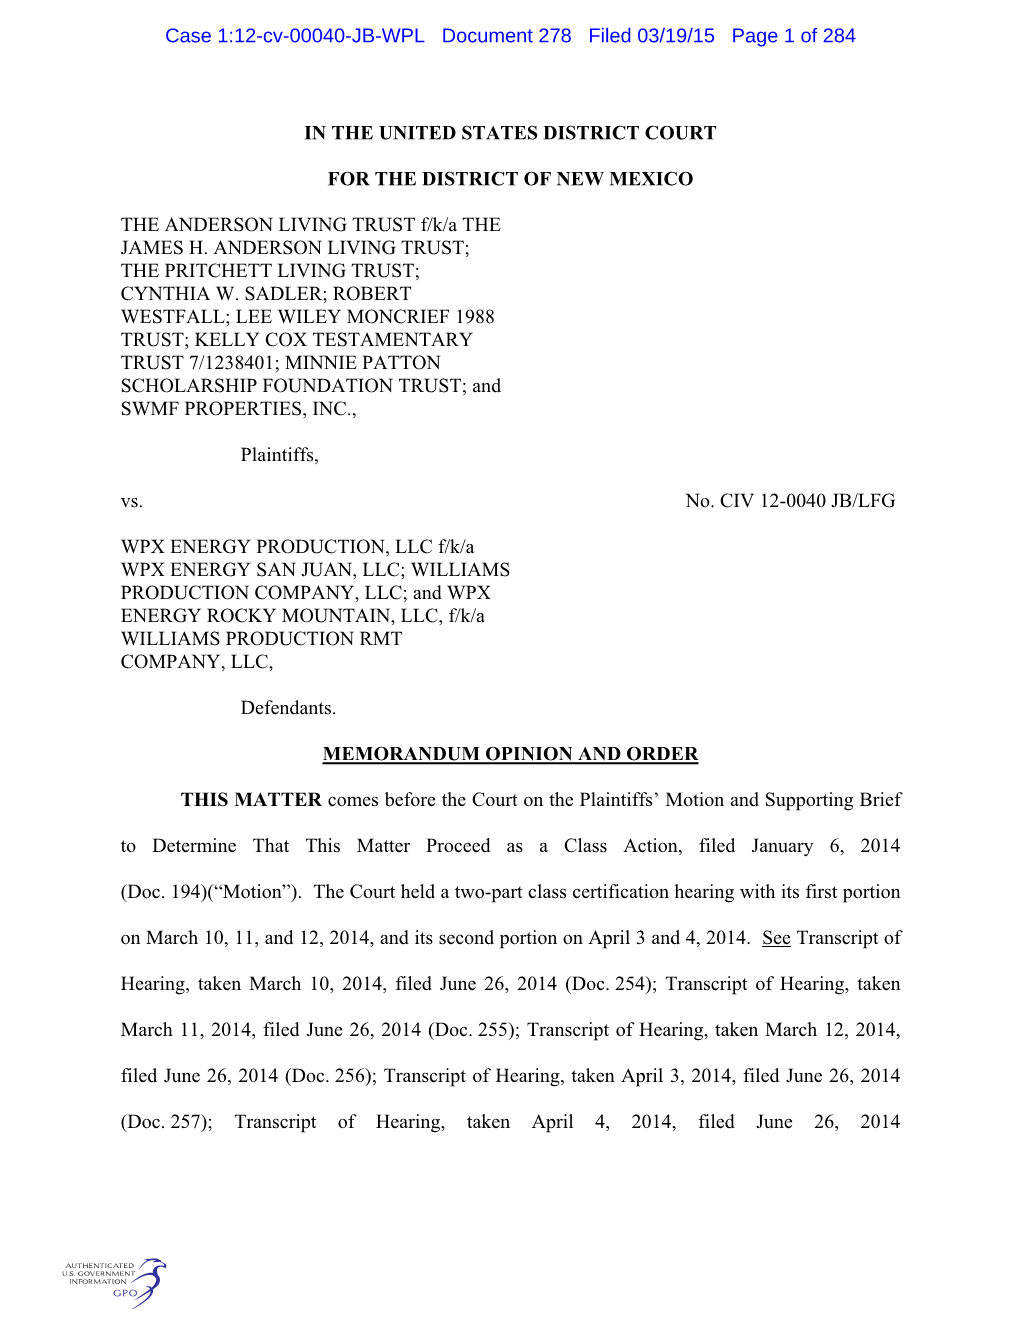 Case 1:12-Cv-00040-JB-WPL Document 278 Filed 03/19/15 Page 1 of 284